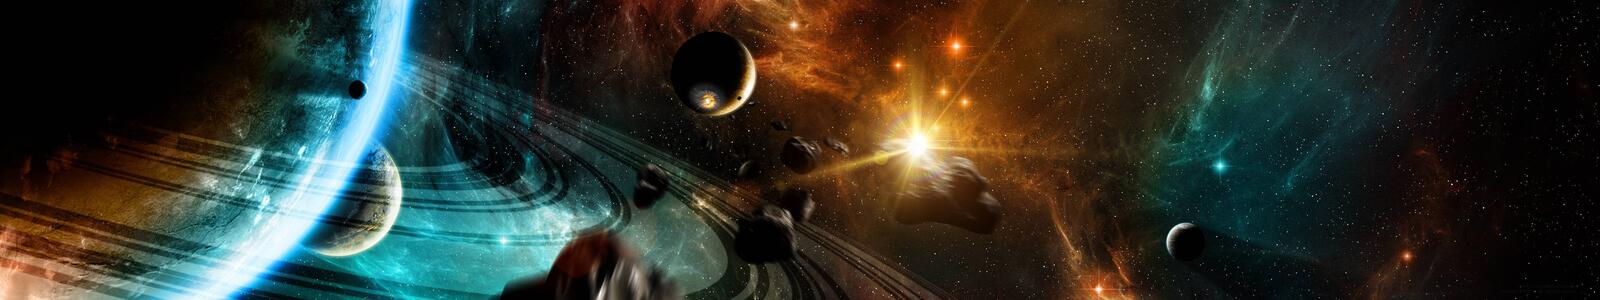 Wallpapers espace beautifully planets on the desktop